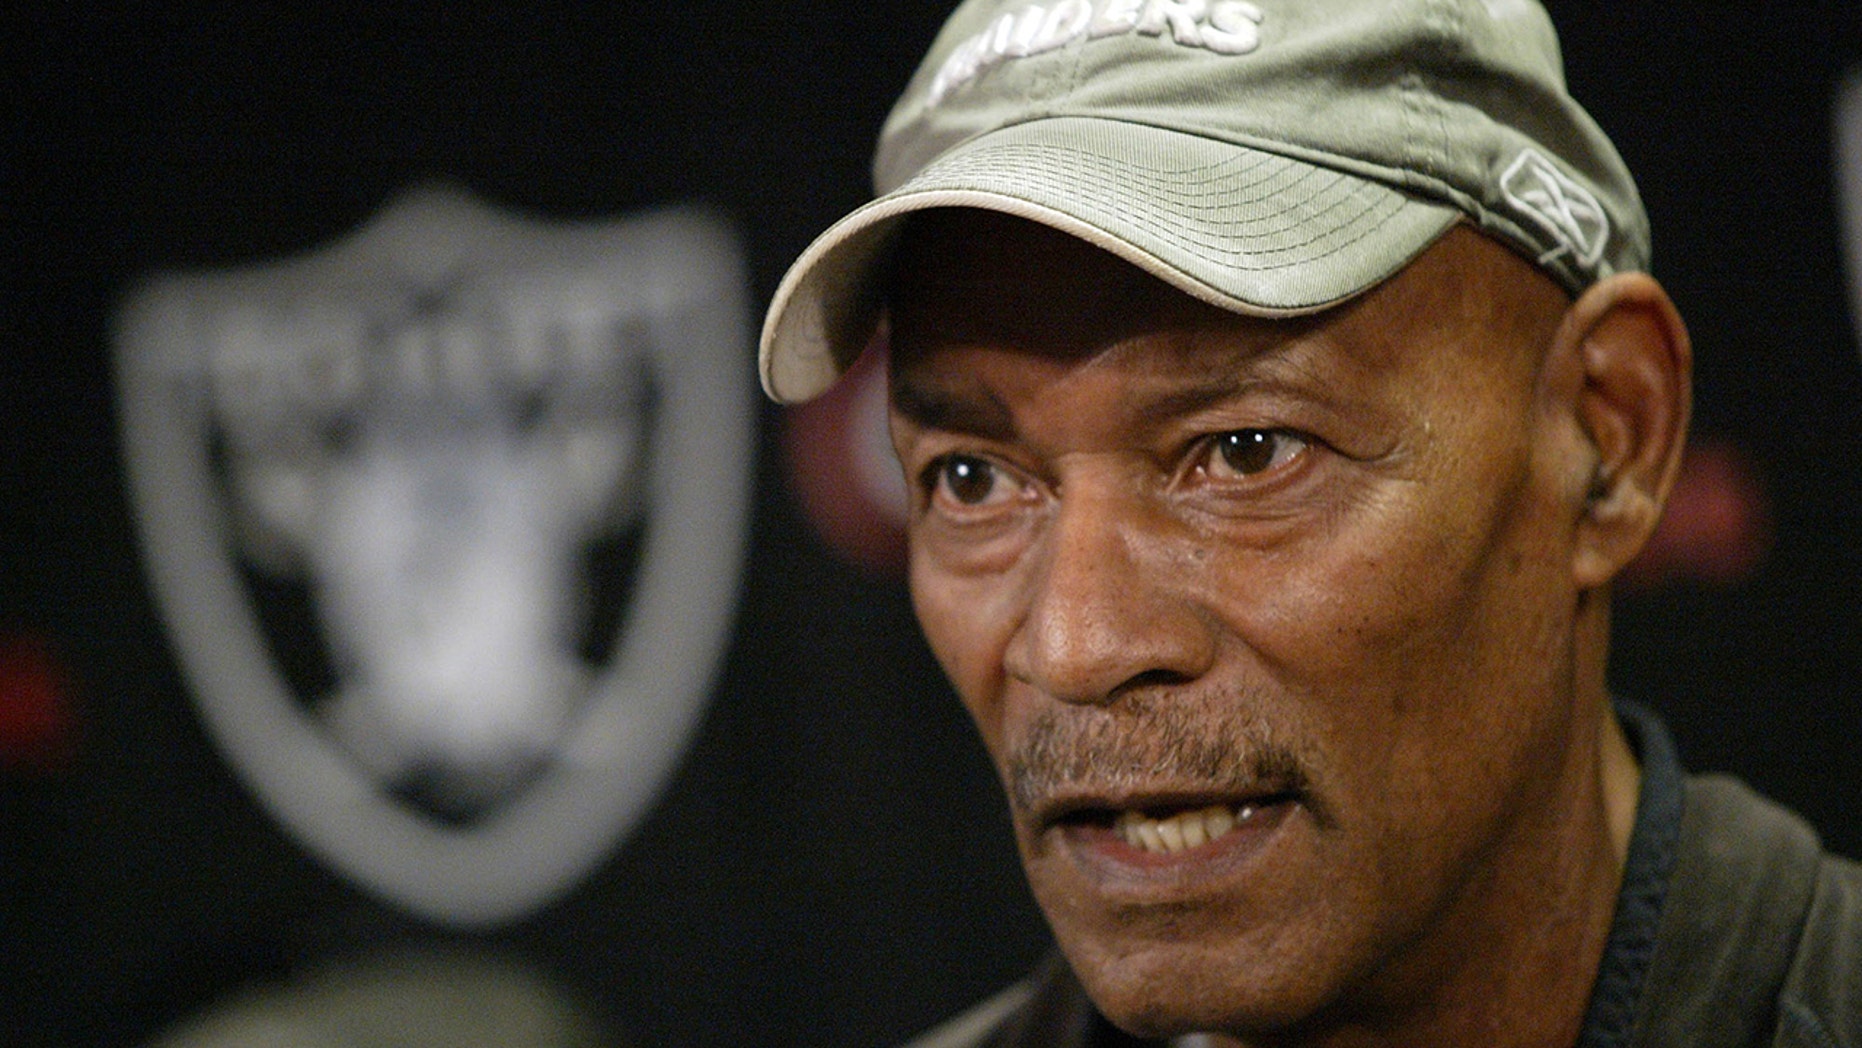 Oakland Raiders legend Willie Brown has died at the age of 78. He is pictured in 2009. (Photo by MediaNews Group/Bay Area News via Getty Images)